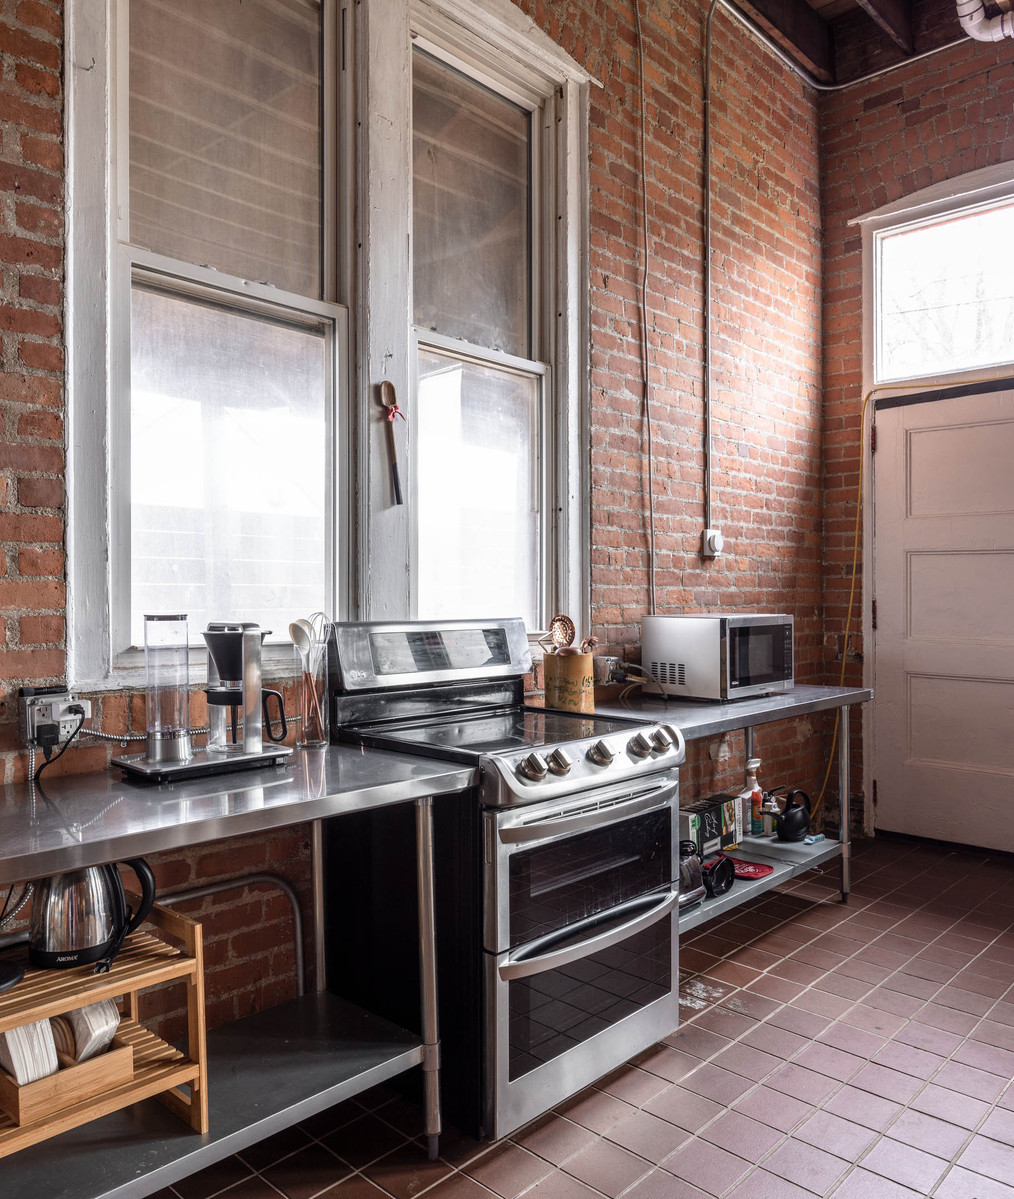 Detroit photo studio for daily rental. Kitchen available in lounge. Functioning stove and microwave and toaster.